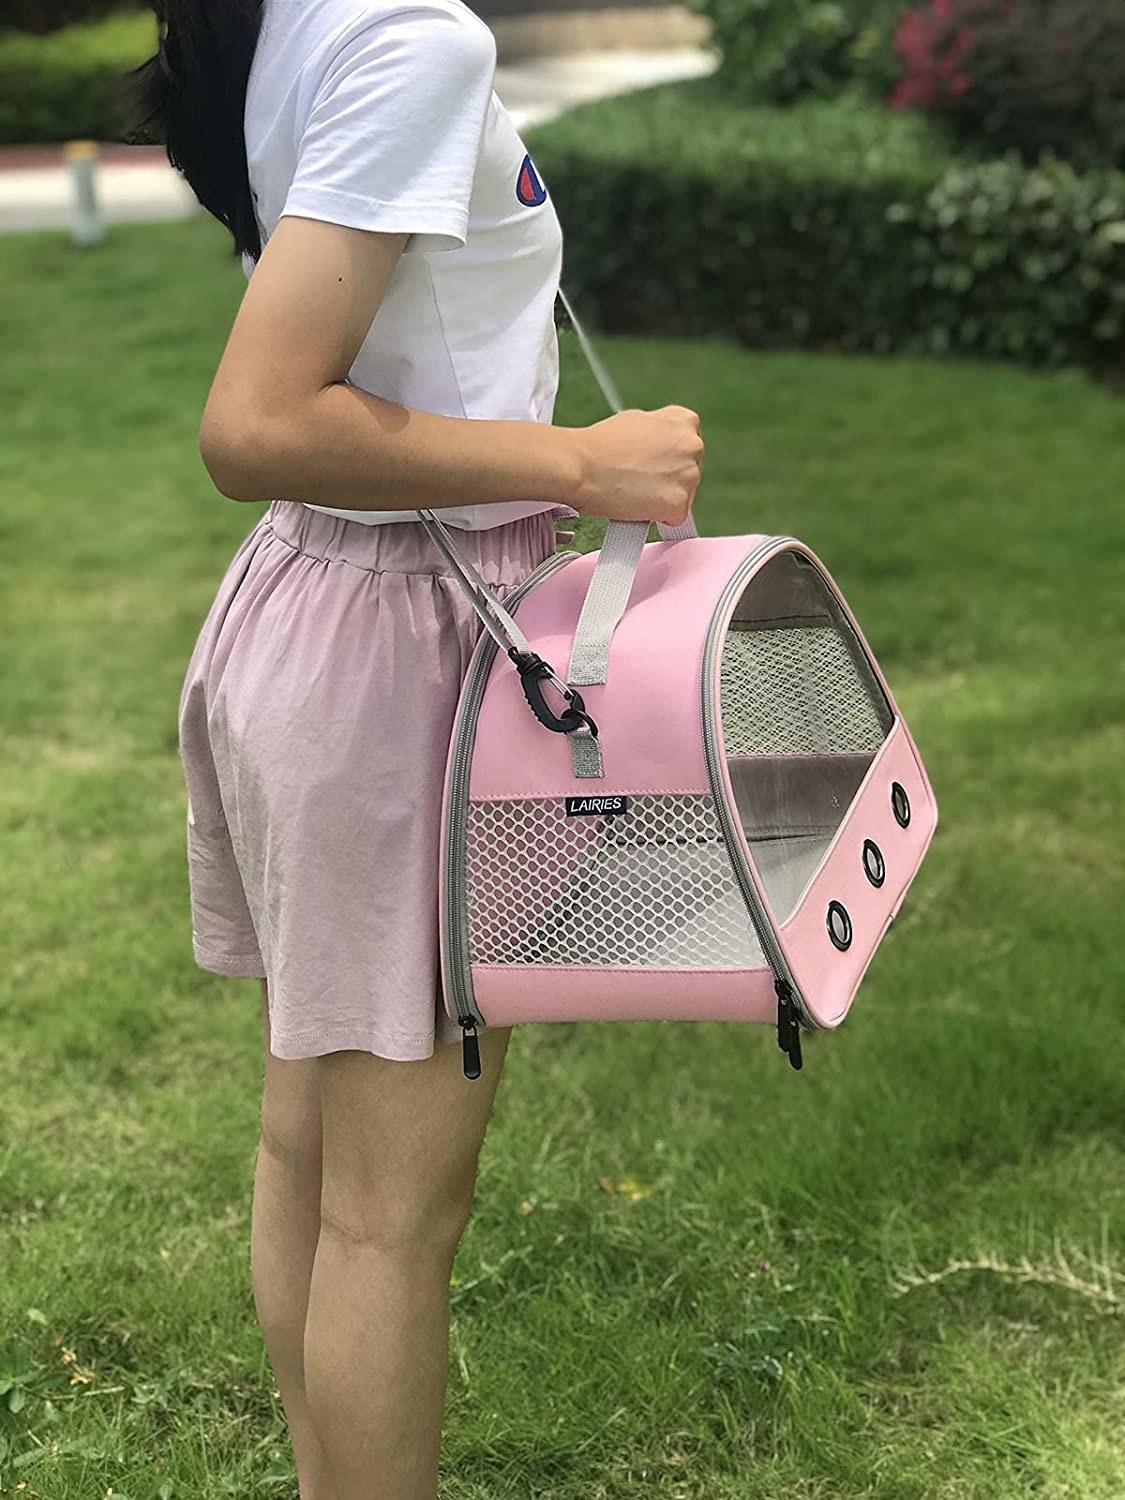 Someone wearing the carrier while standing in the grass